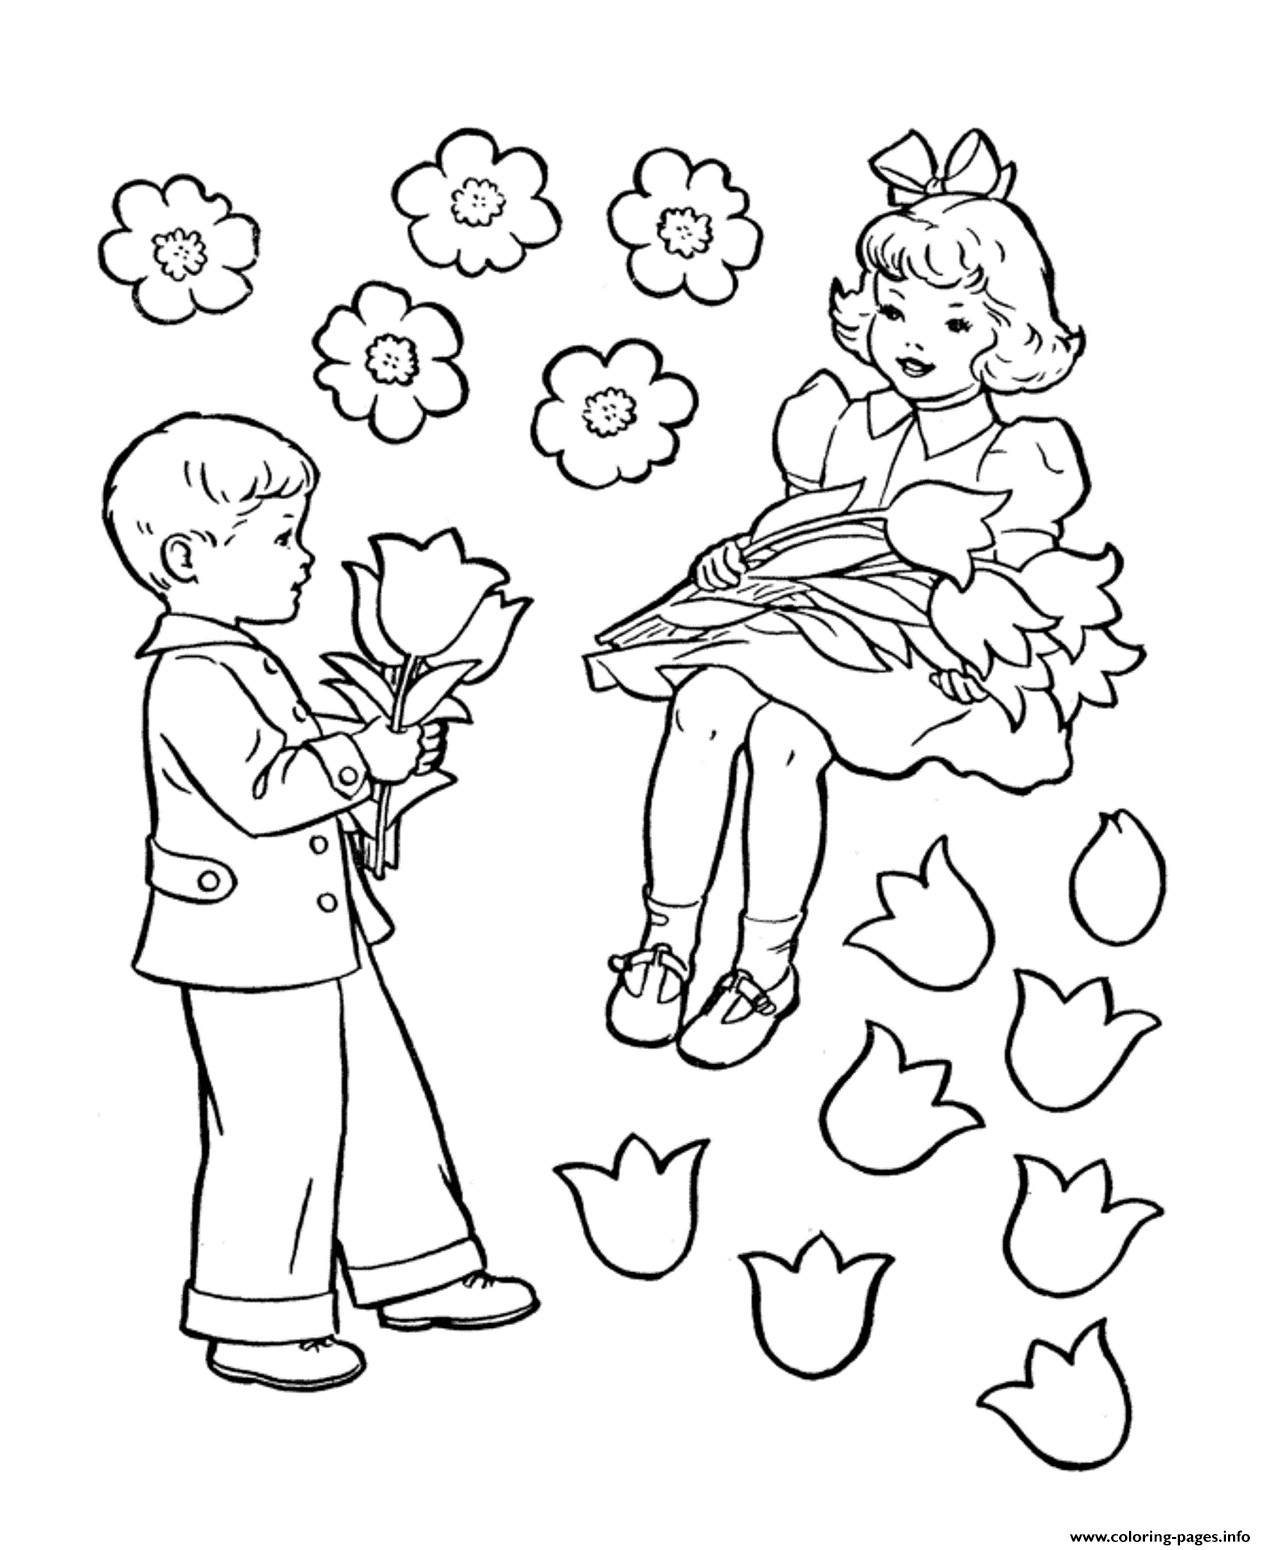 Valentine Coloring Pages For Girls
 Little Boy And Girl Valentines S3cae Coloring Pages Printable